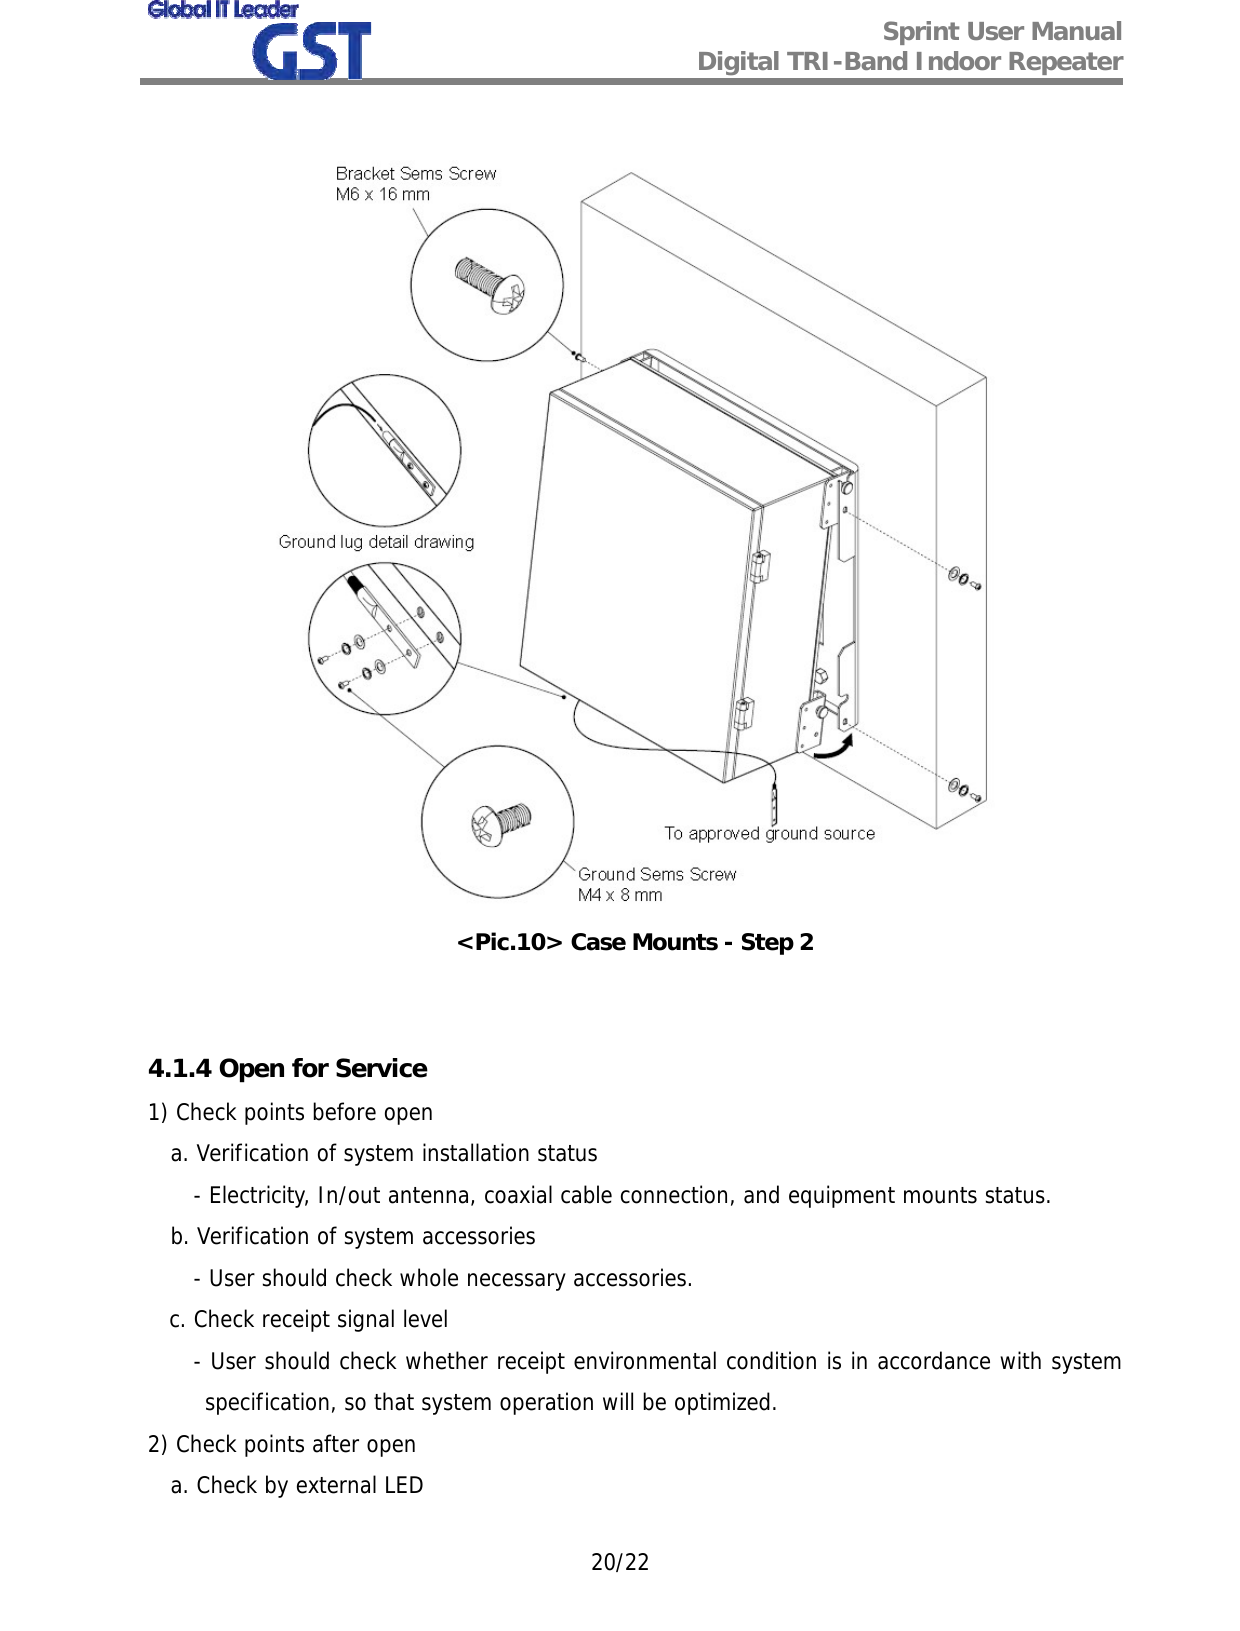  Sprint User Manual Digital TRI-Band Indoor Repeater   20/22   &lt;Pic.10&gt; Case Mounts - Step 2   4.1.4 Open for Service 1) Check points before open a. Verification of system installation status - Electricity, In/out antenna, coaxial cable connection, and equipment mounts status. b. Verification of system accessories - User should check whole necessary accessories.    c. Check receipt signal level - User should check whether receipt environmental condition is in accordance with system specification, so that system operation will be optimized. 2) Check points after open a. Check by external LED 